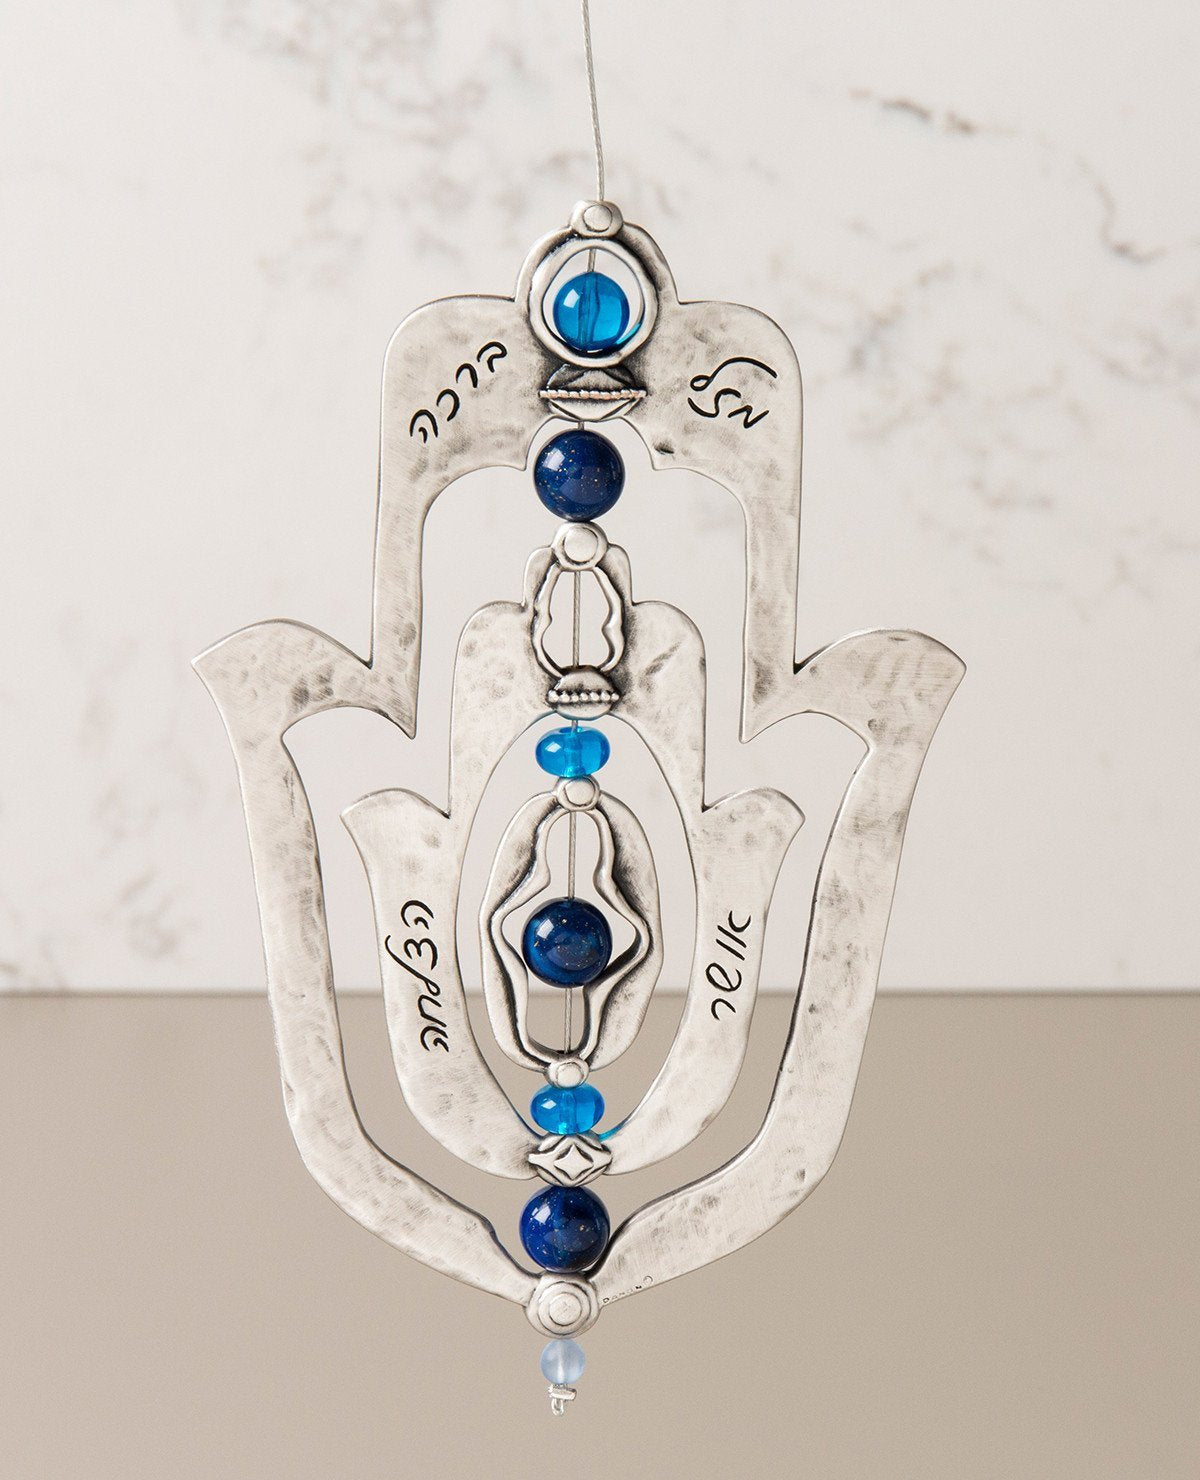 An impressive and neatly designed hanging Hamsa ornament coated in sterling silver. Set on an axis inside a large Hamsa is a smaller Hamsa. The axis is made from a thin string coated in silver and decorated by blue beads. The ornament spins on the axis, and on each side appear different words of blessing. The qualities of the Hamsa on one side and the power of the words respectively on the other. A great gift that is also a joyful and heartwarming blessing, for any occasion. The ornament comes with a faux l